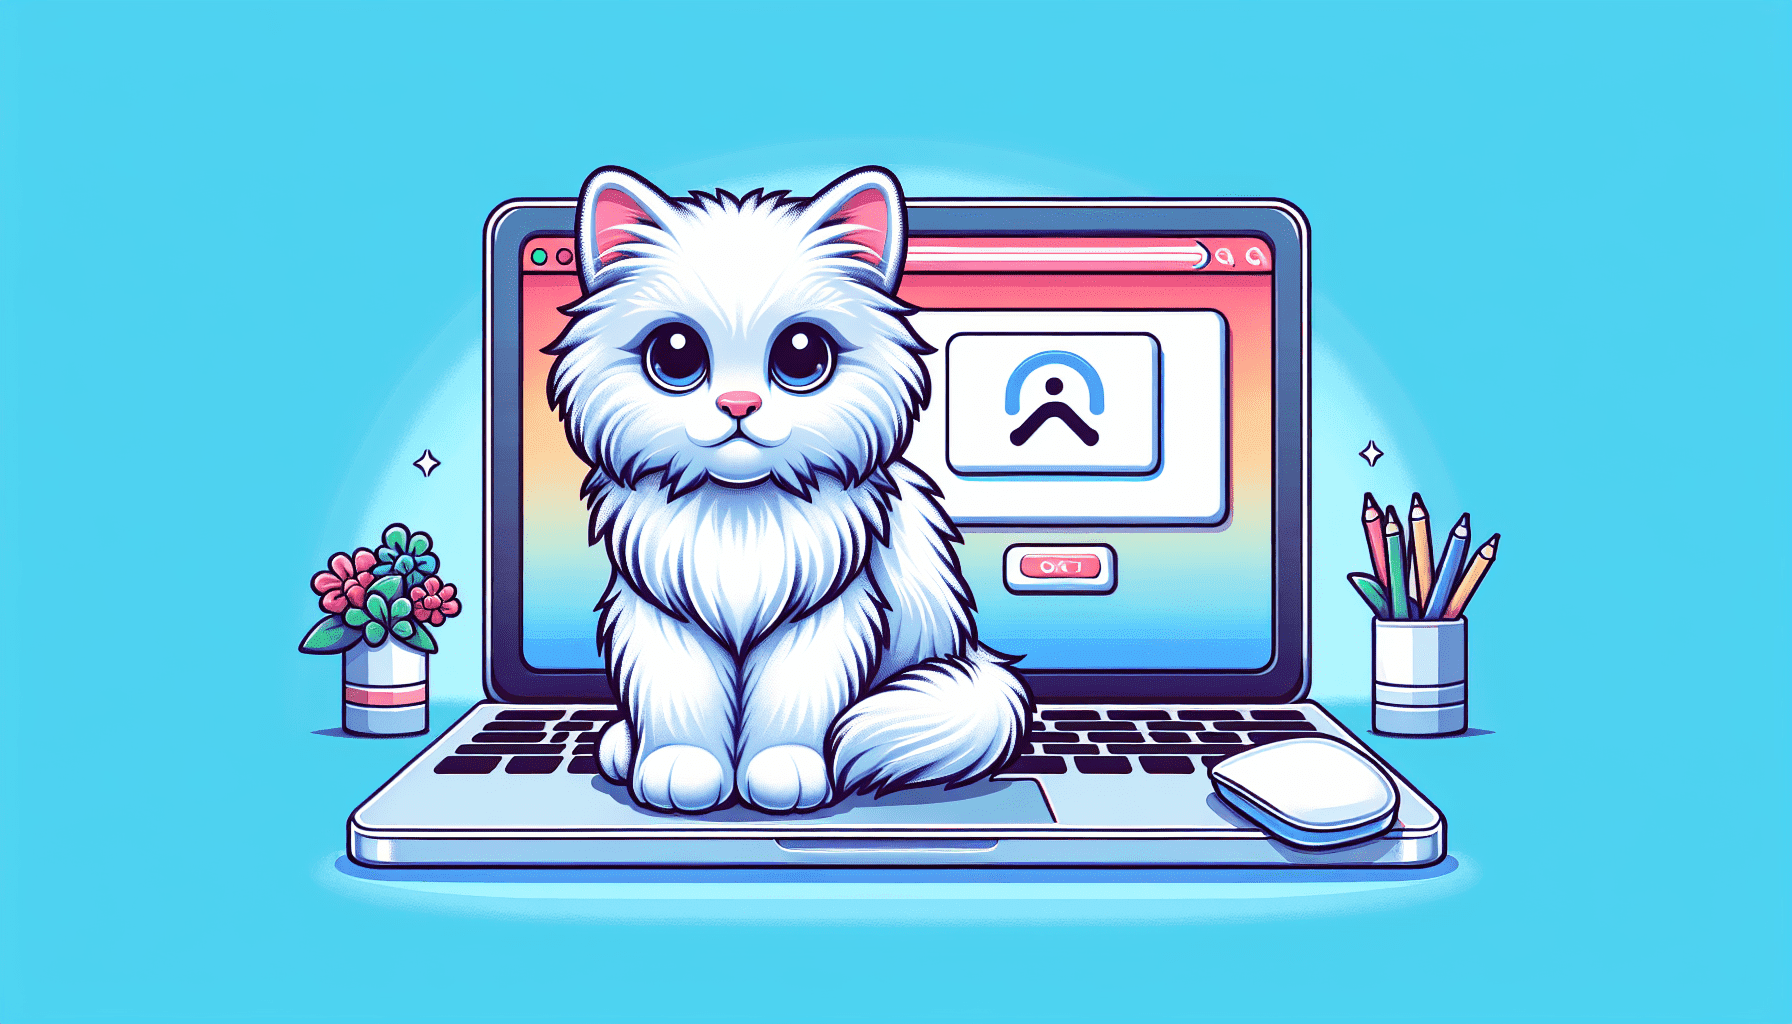 A cute, fluffy white kitten looking confused in front of a laptop that displays a page not found error message.